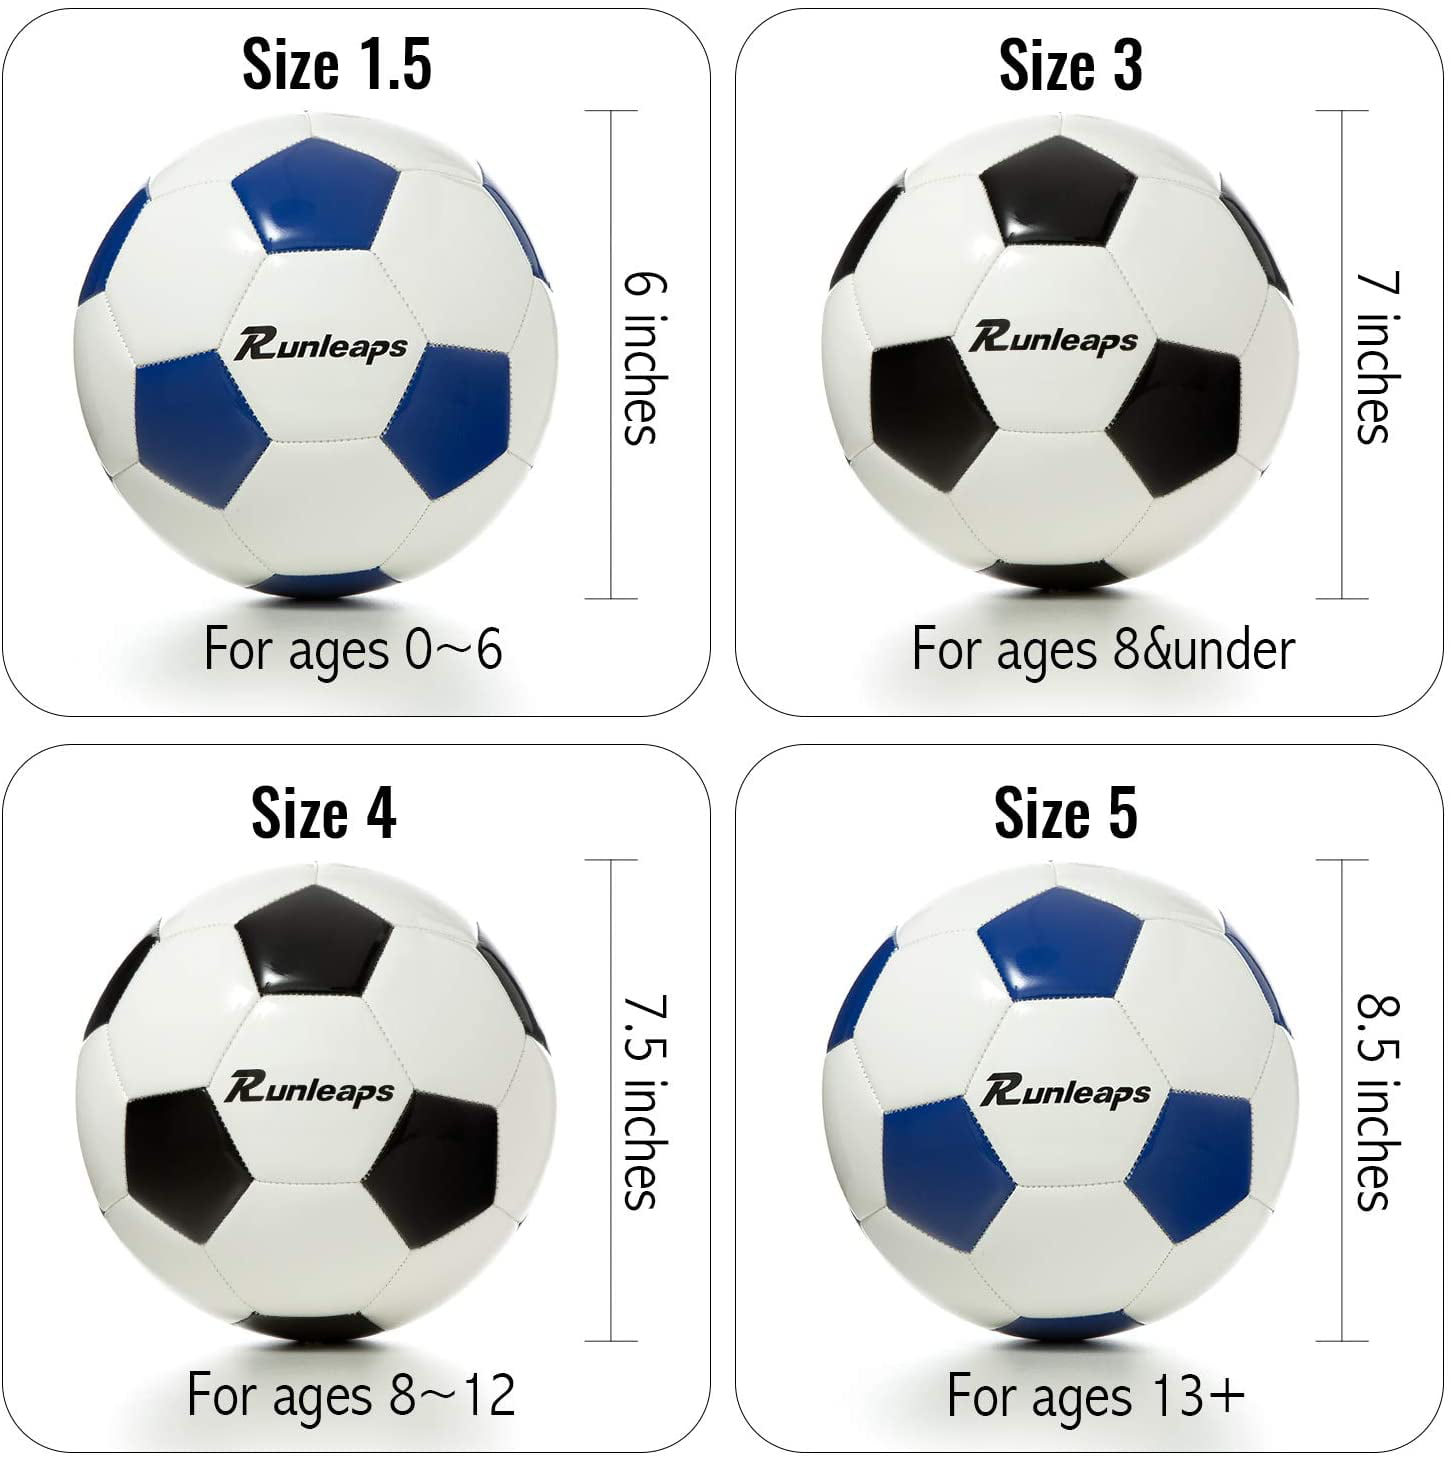 Kids YANYODO Soccer Training Ball Practice Soccer Balls Classic Sizes 3,4,5 for Youth Perfect for Outdoor & Indoor Match or Game 